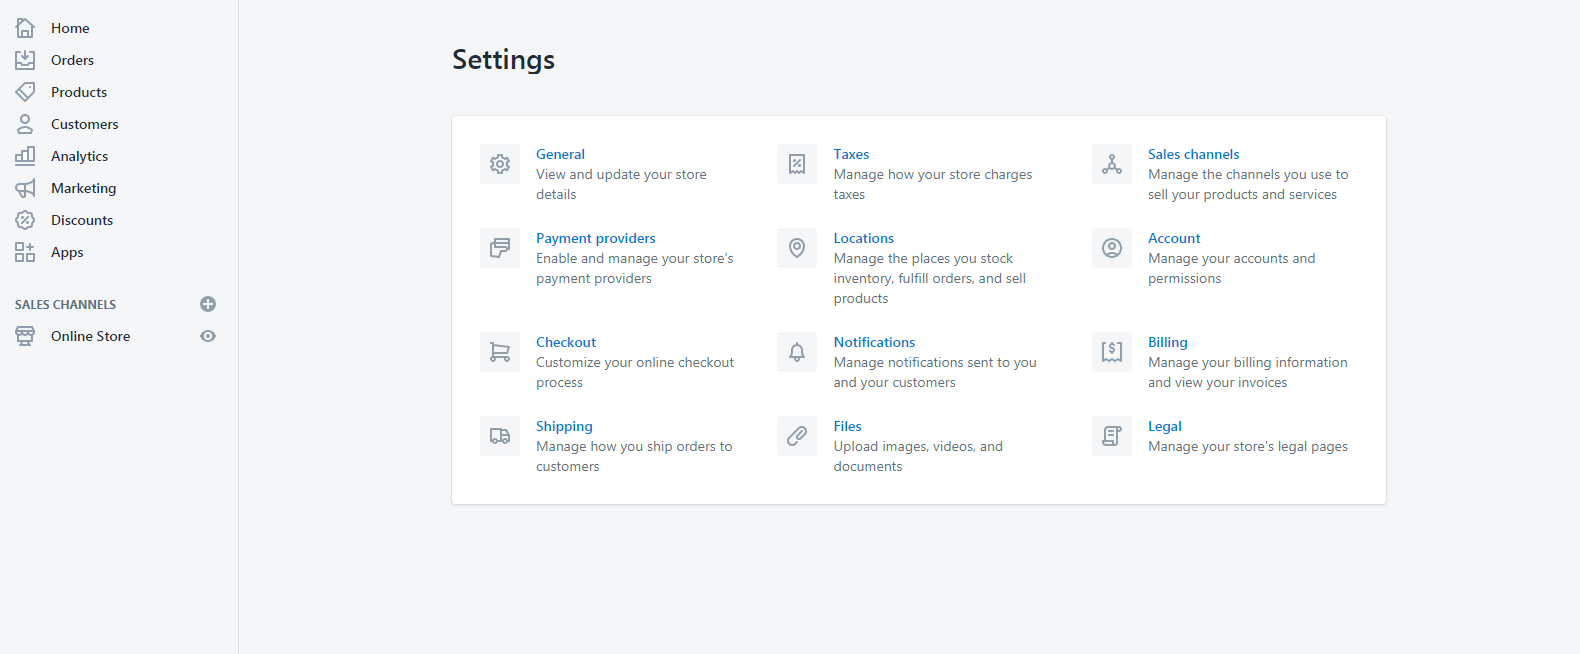 Shopify Partner Dashboard: Settings Page